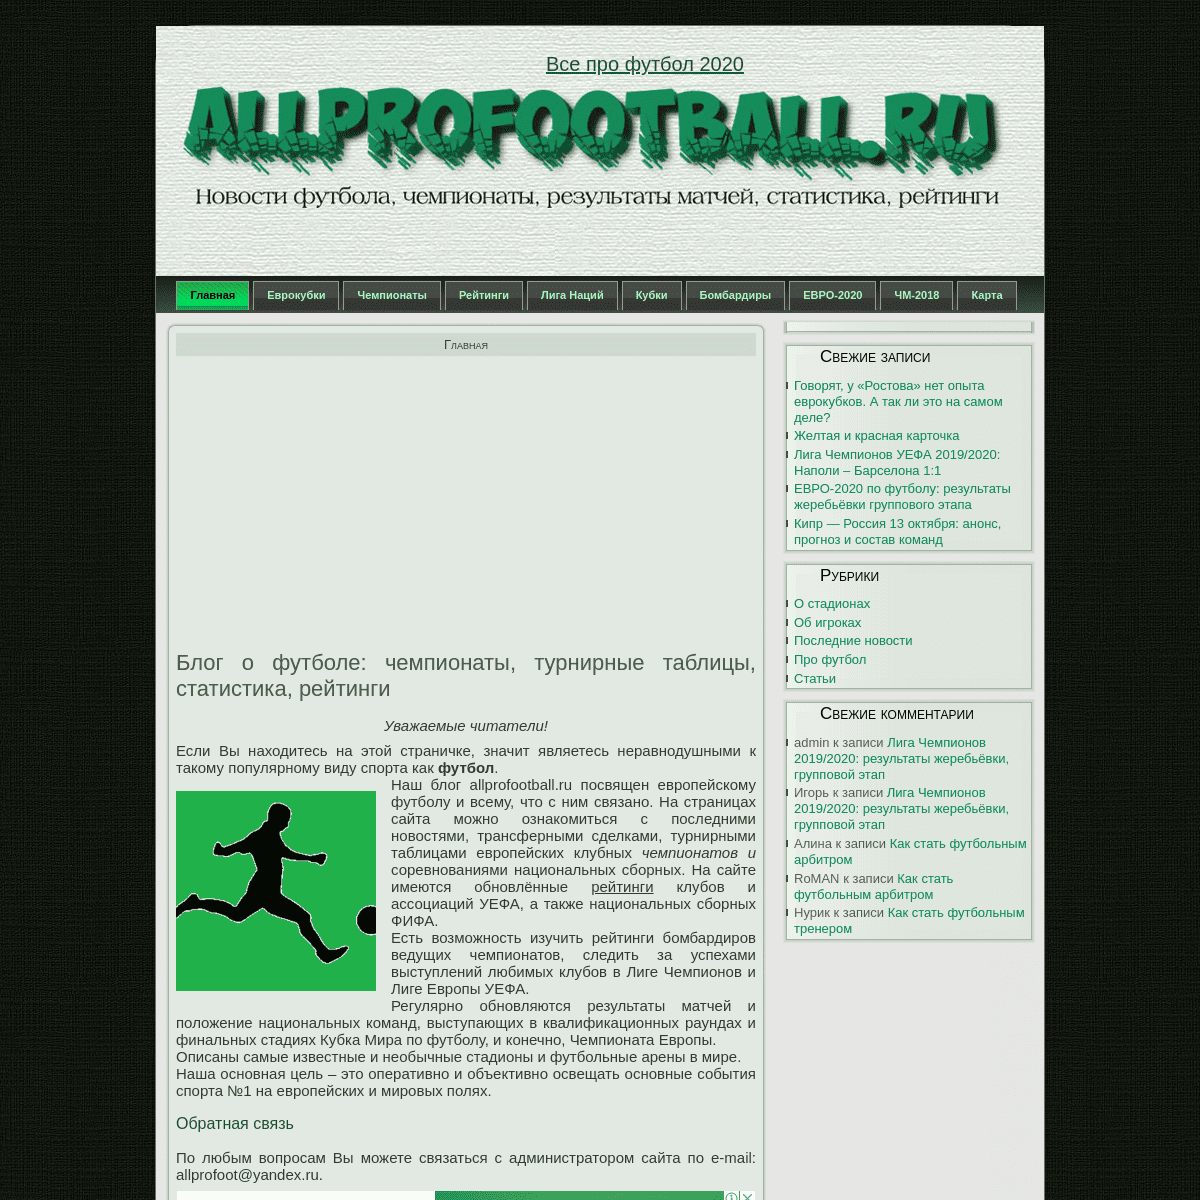 A complete backup of allprofootball.ru